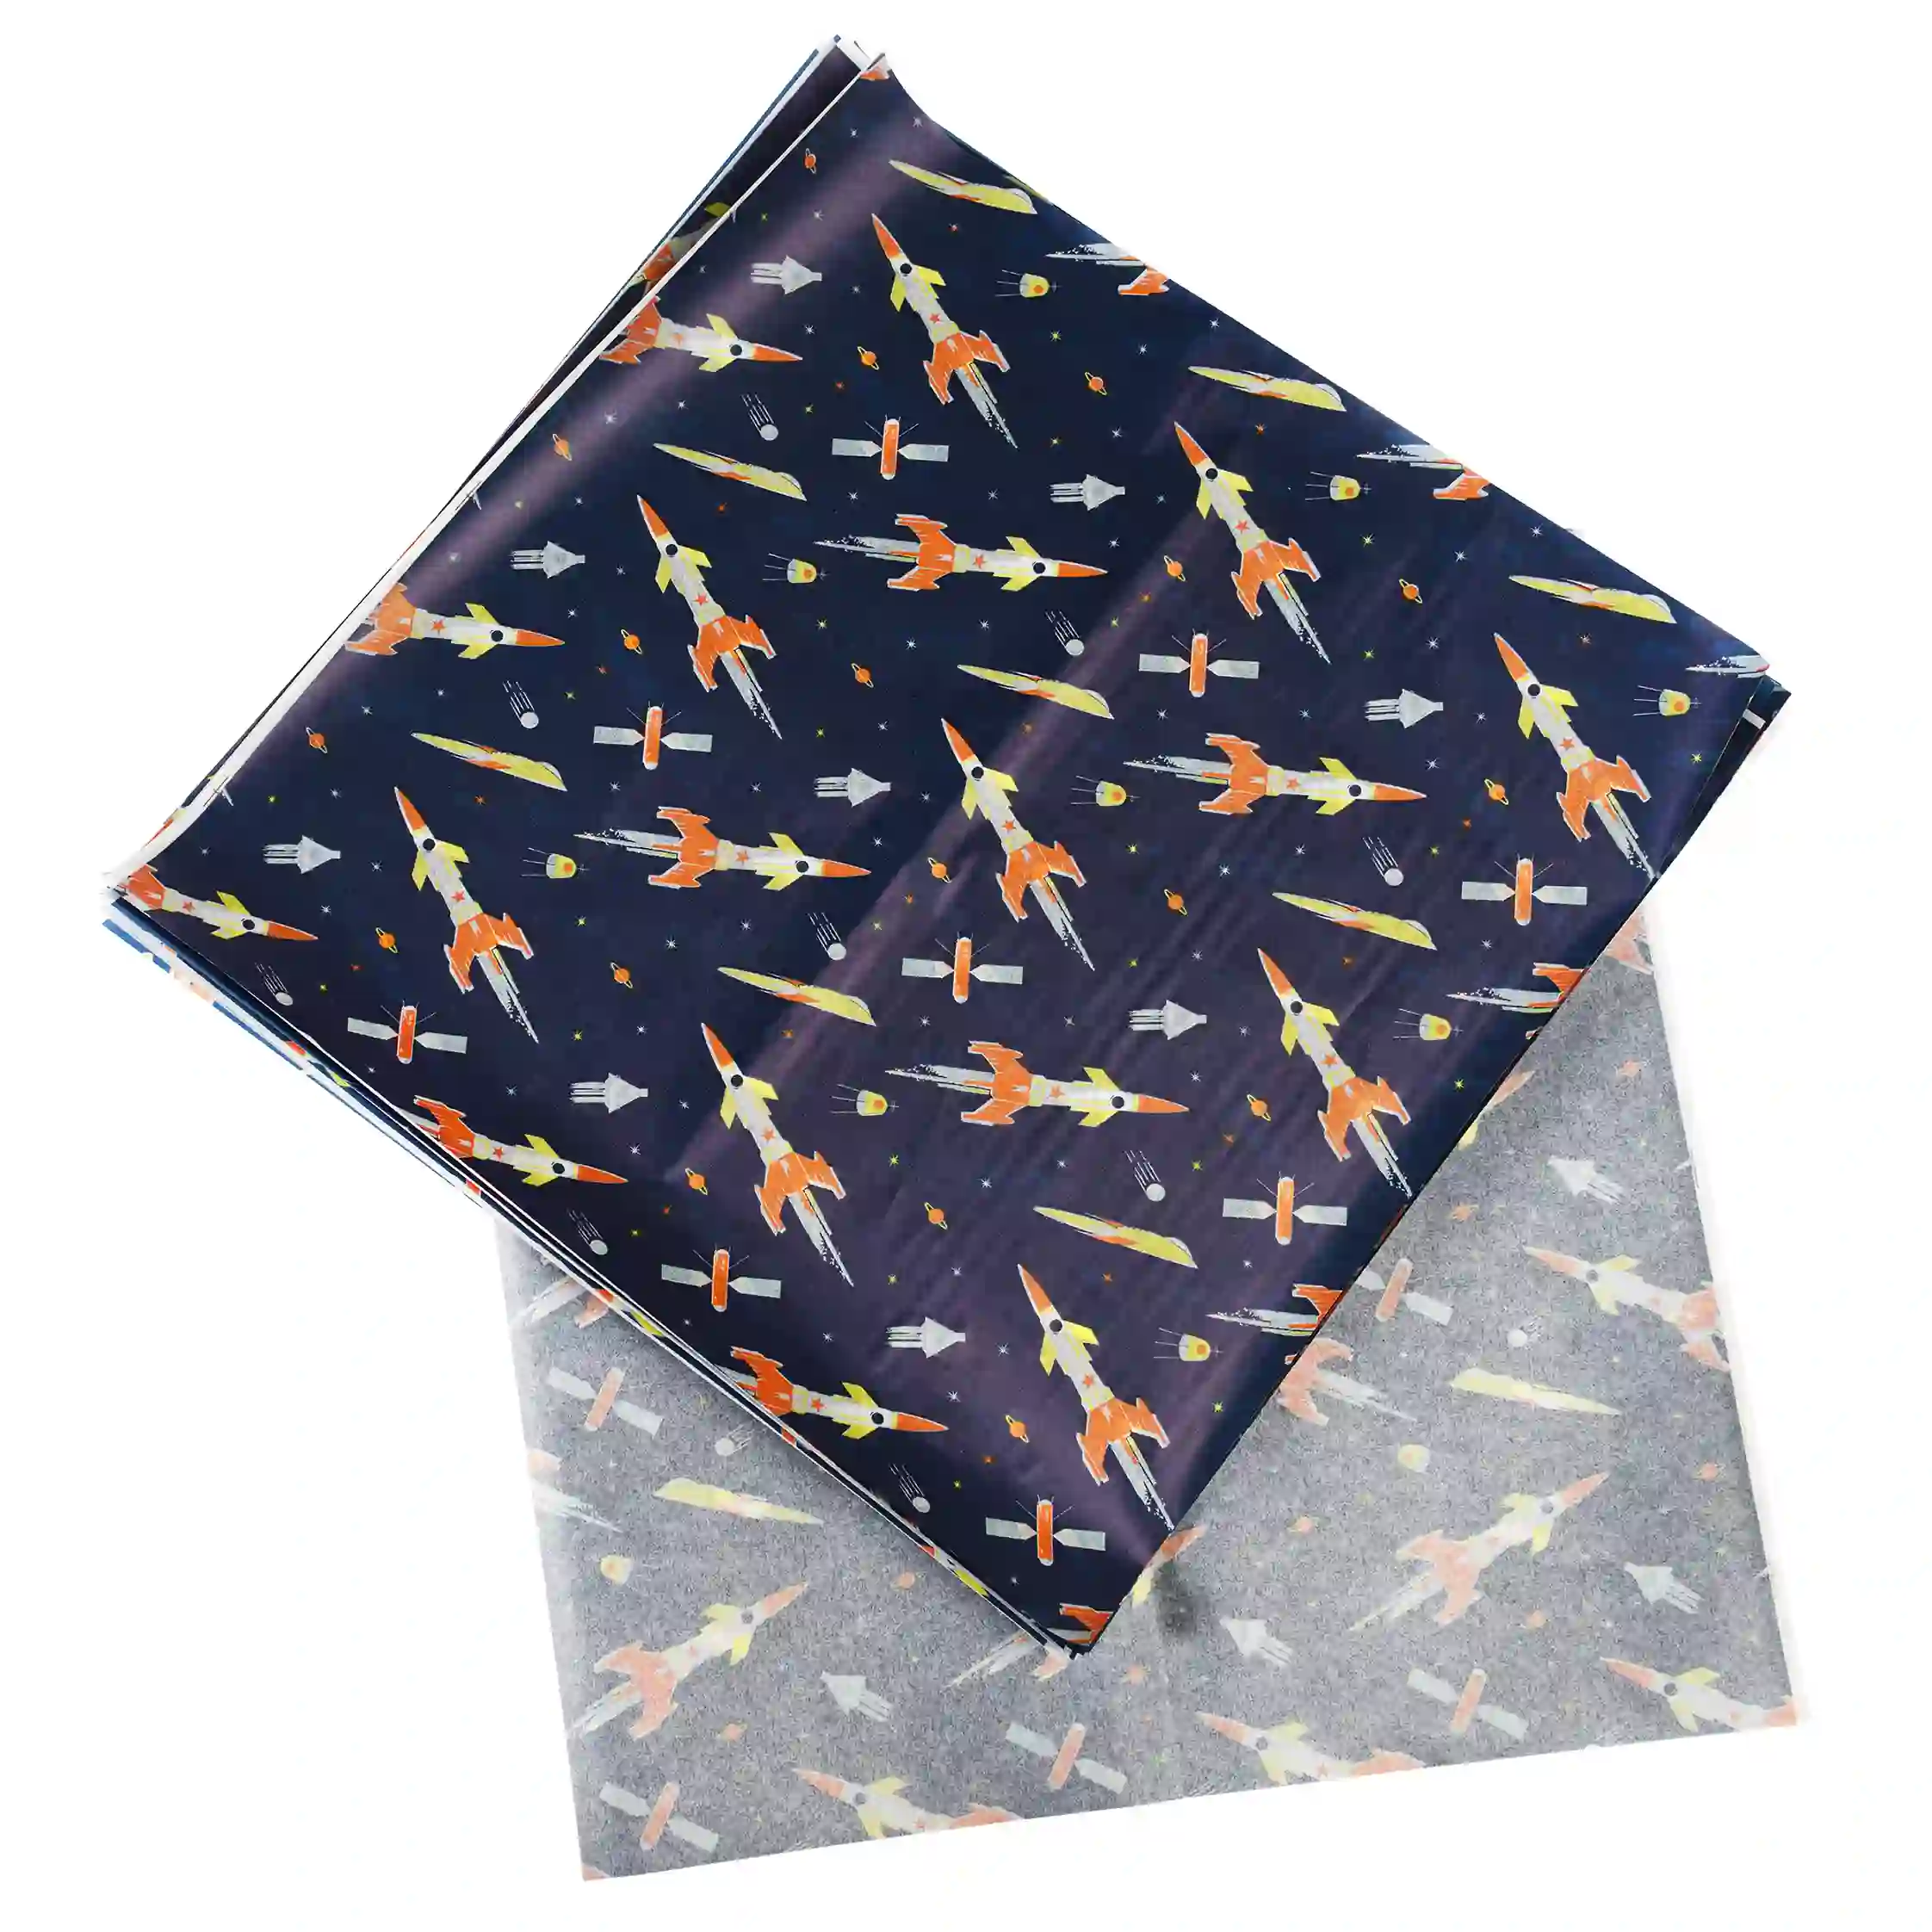 30 sheets greaseproof paper - space age